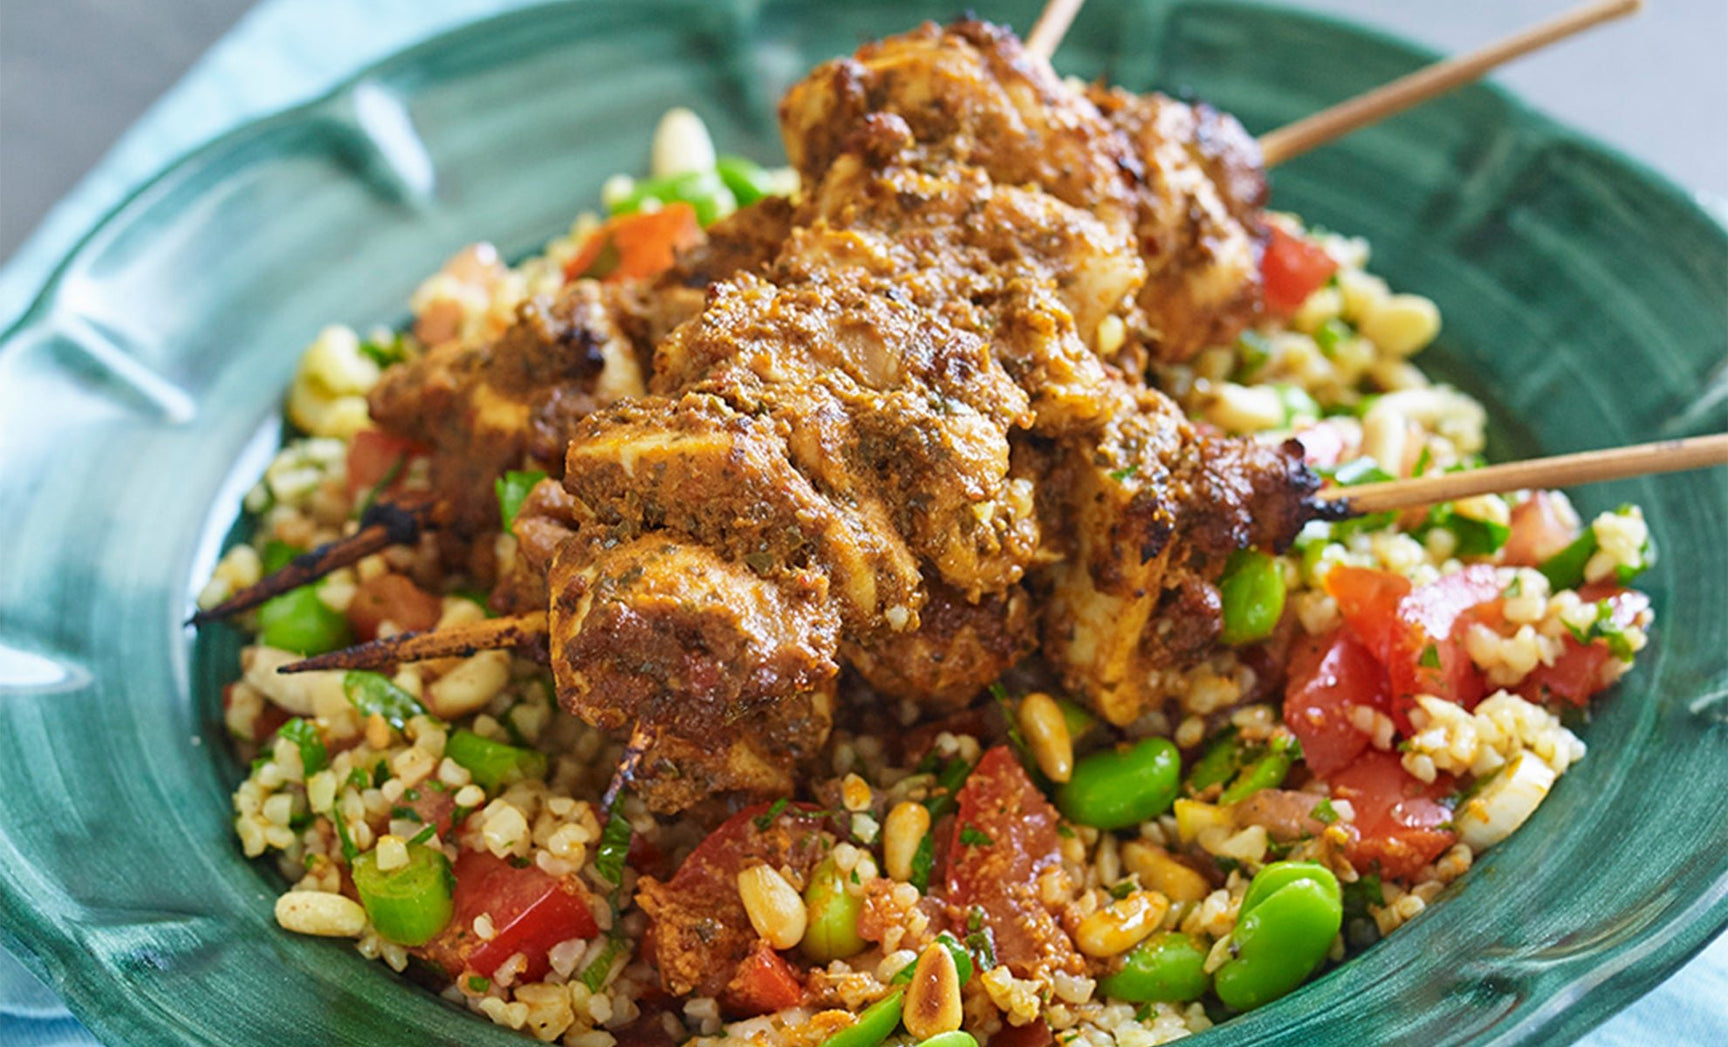 Tomato Pesto Chicken Skewers with Broad Bean Tabbouleh